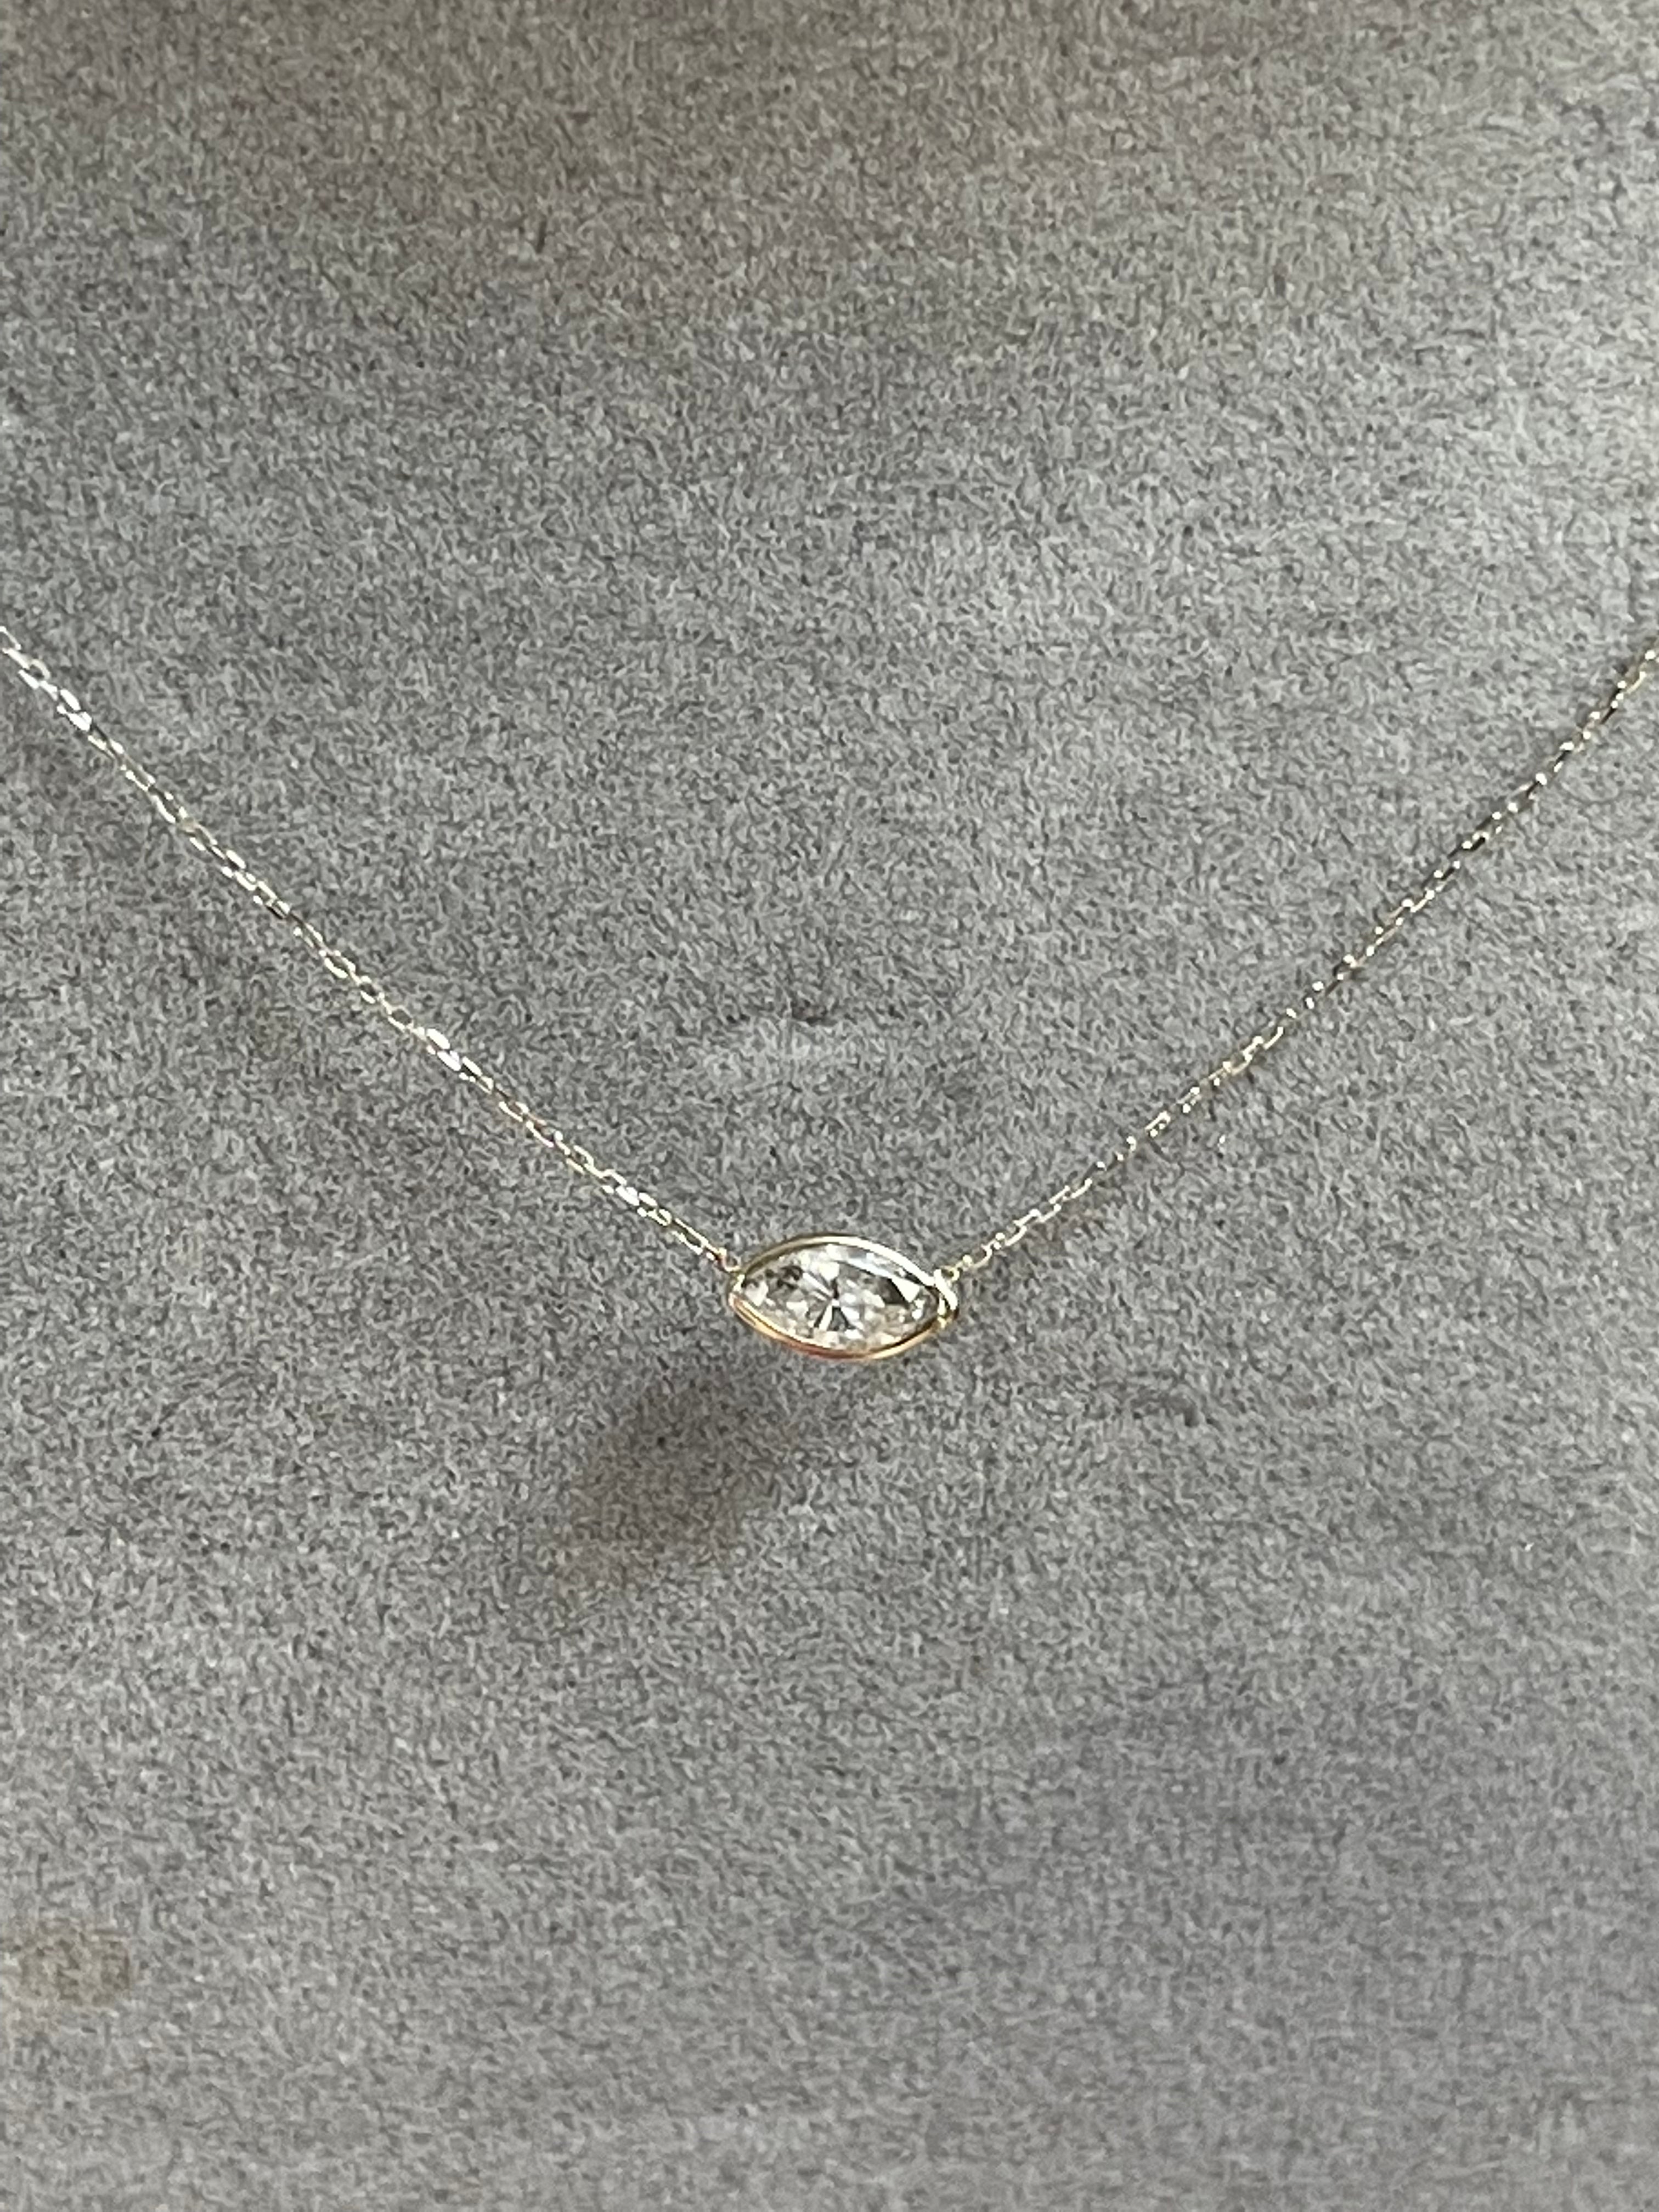 .30CT Marquis Diamond East West Solitaire 16” 14K White Gold Necklace